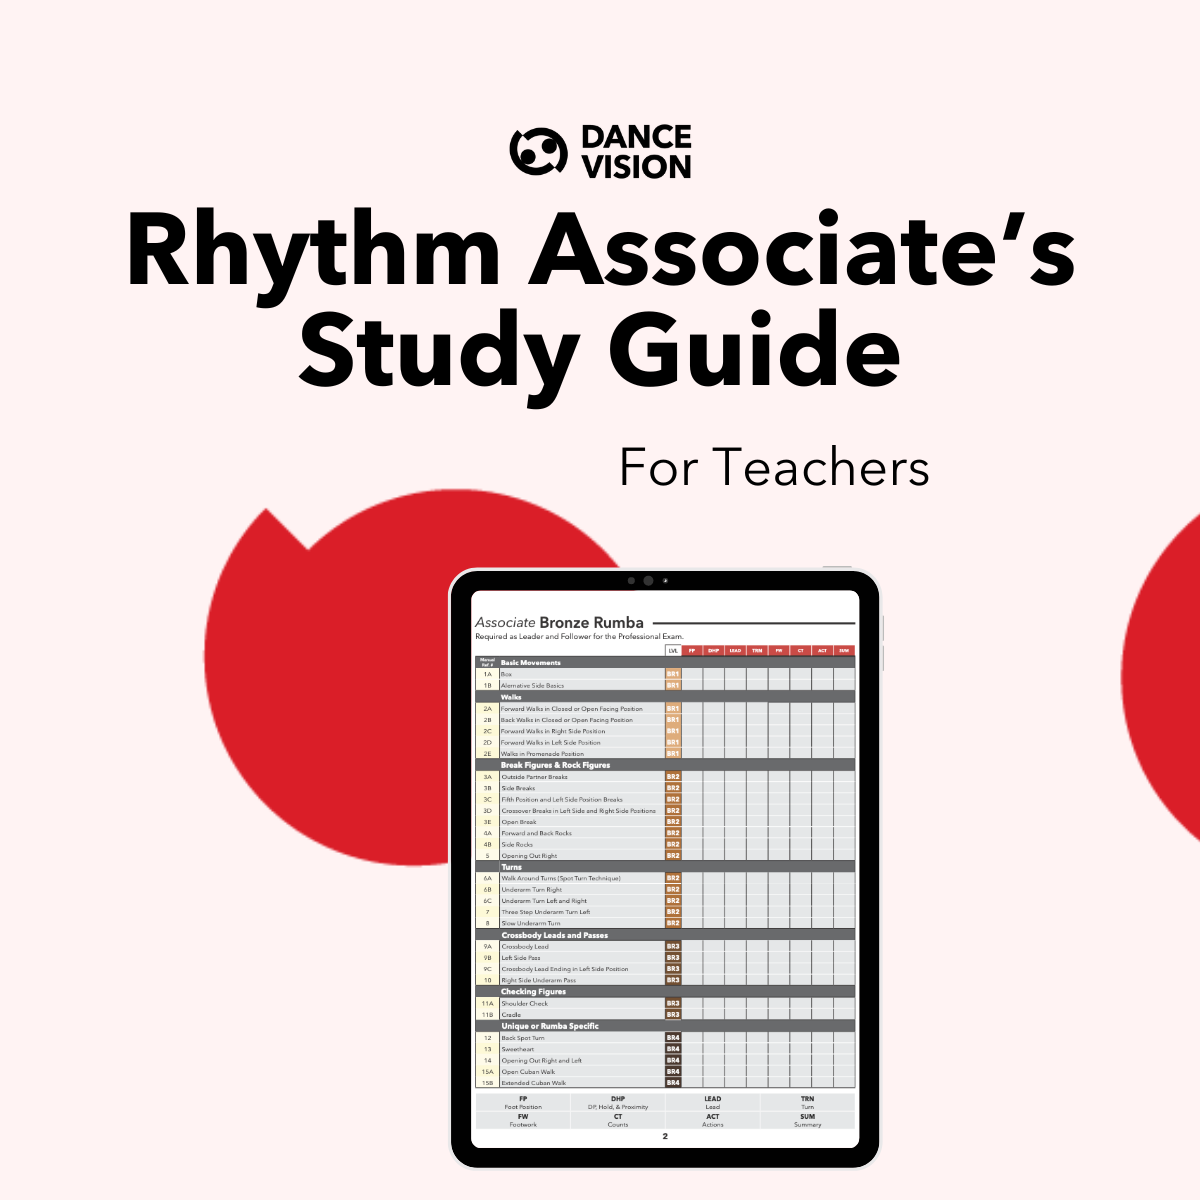 A free study guide for teachers to prepare for the Dance Vision American Rhythm Associate's Certification.